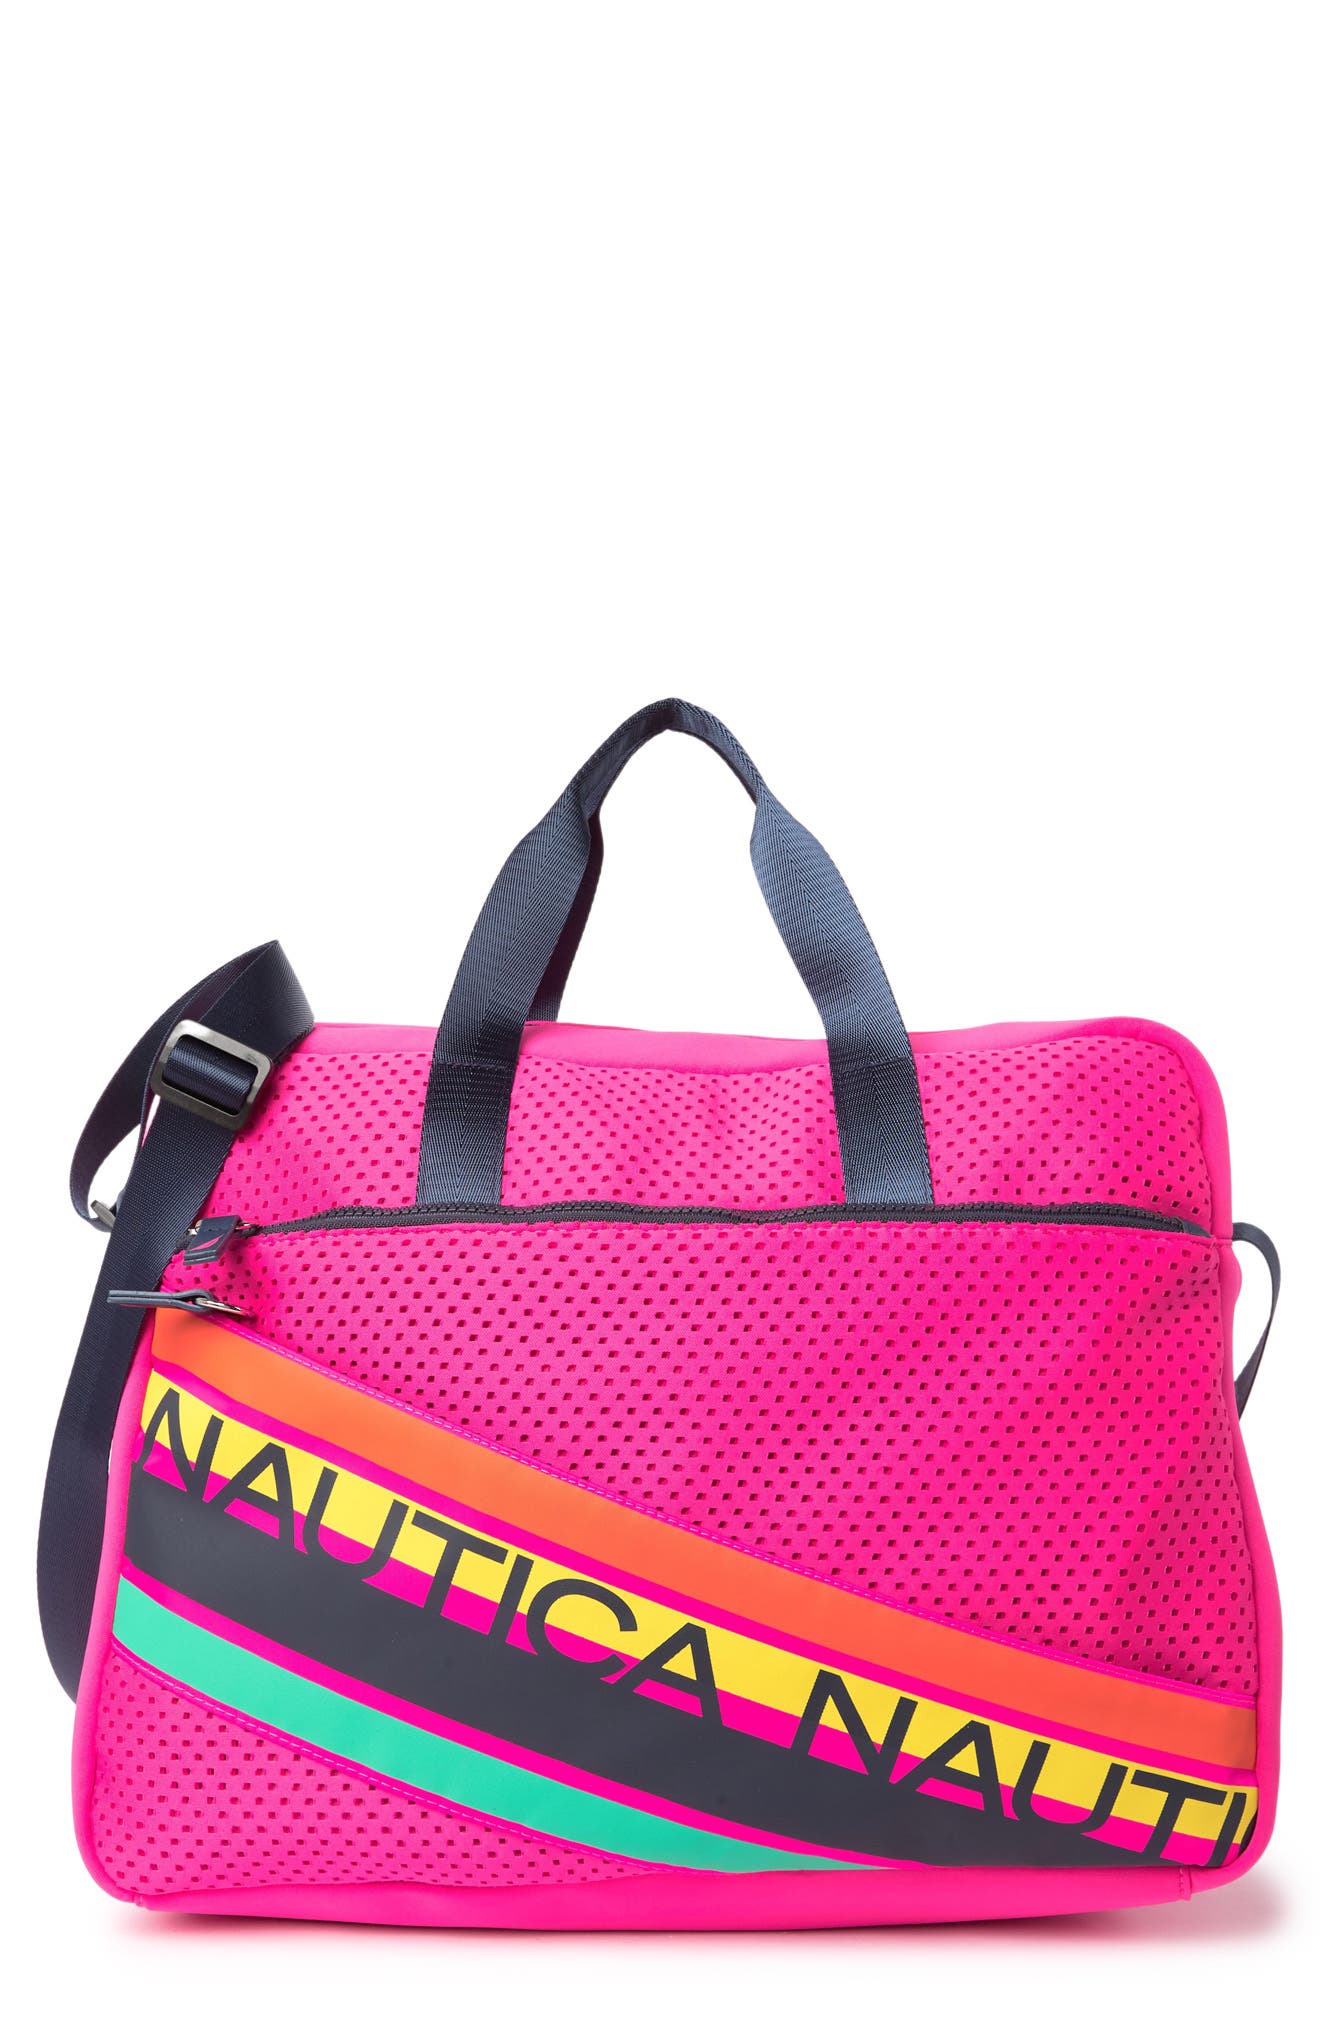 Nautica Jetty Weekend Bag In Red